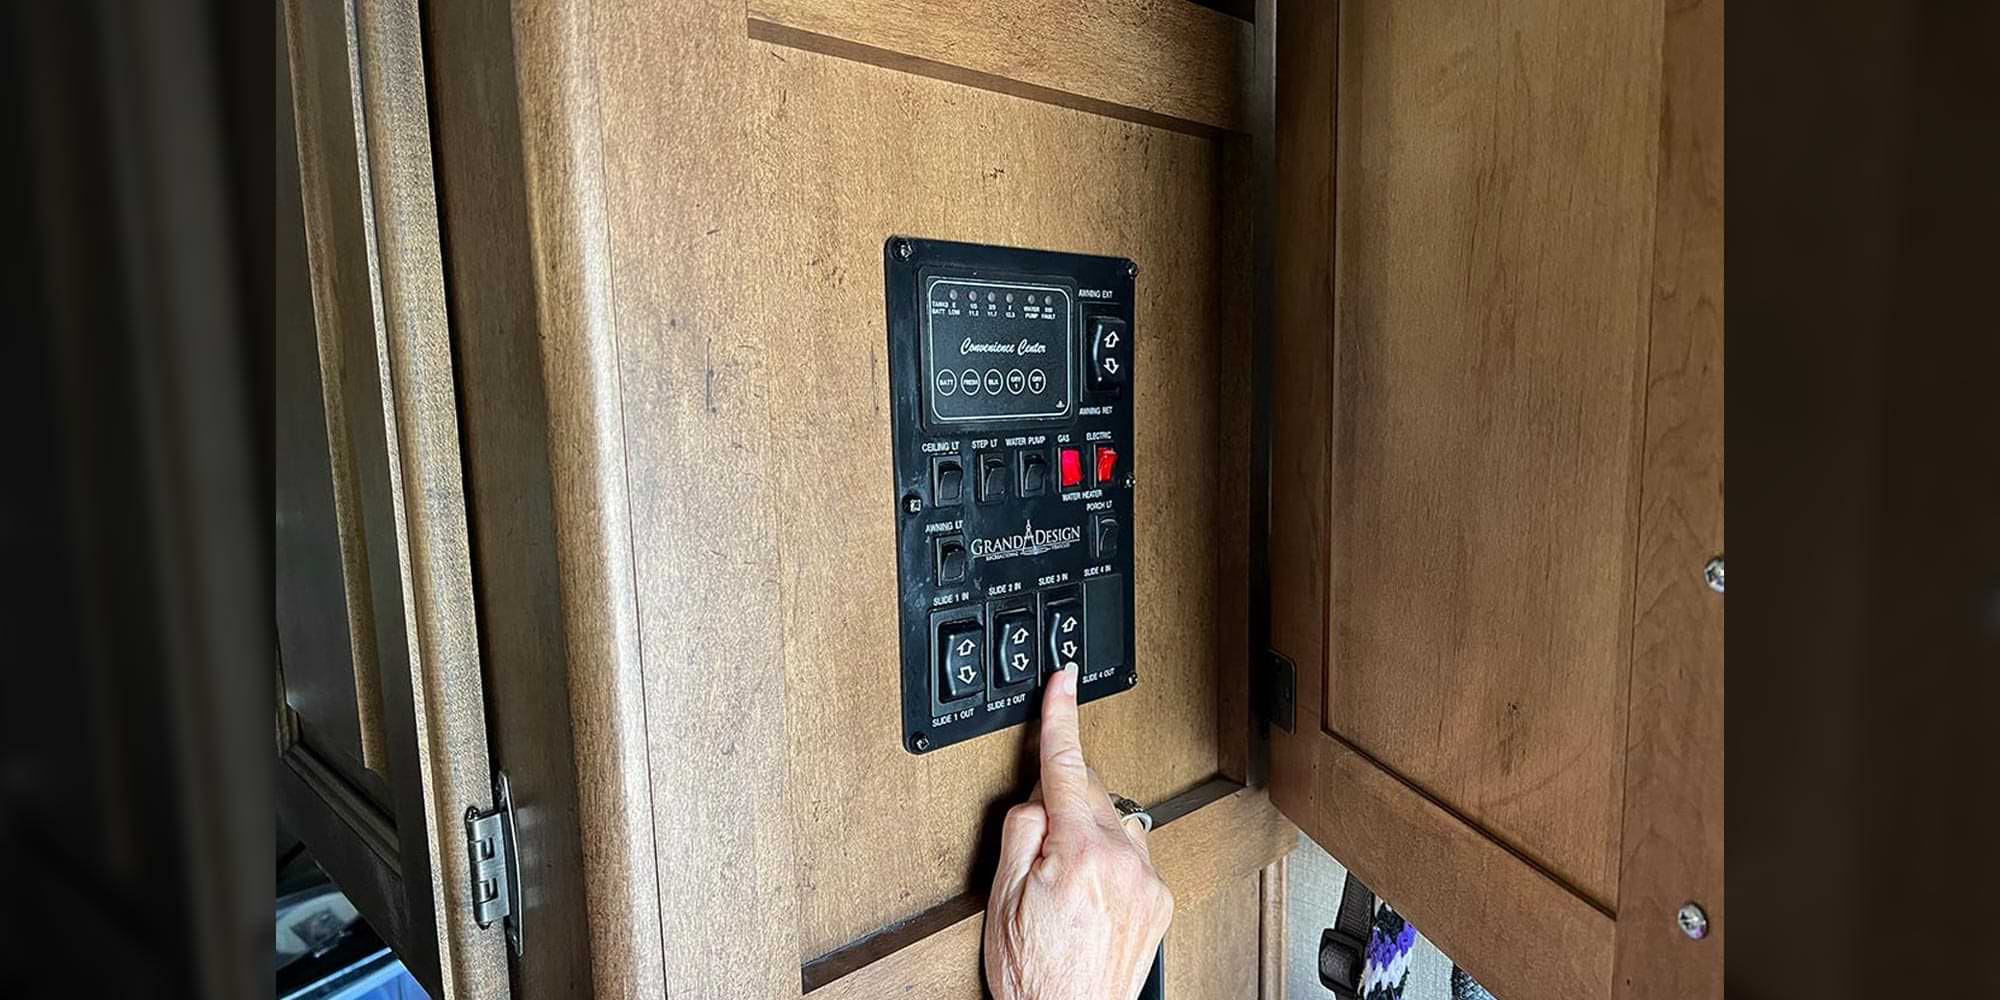 a woman's hand moves to activate a button on a wall control panel